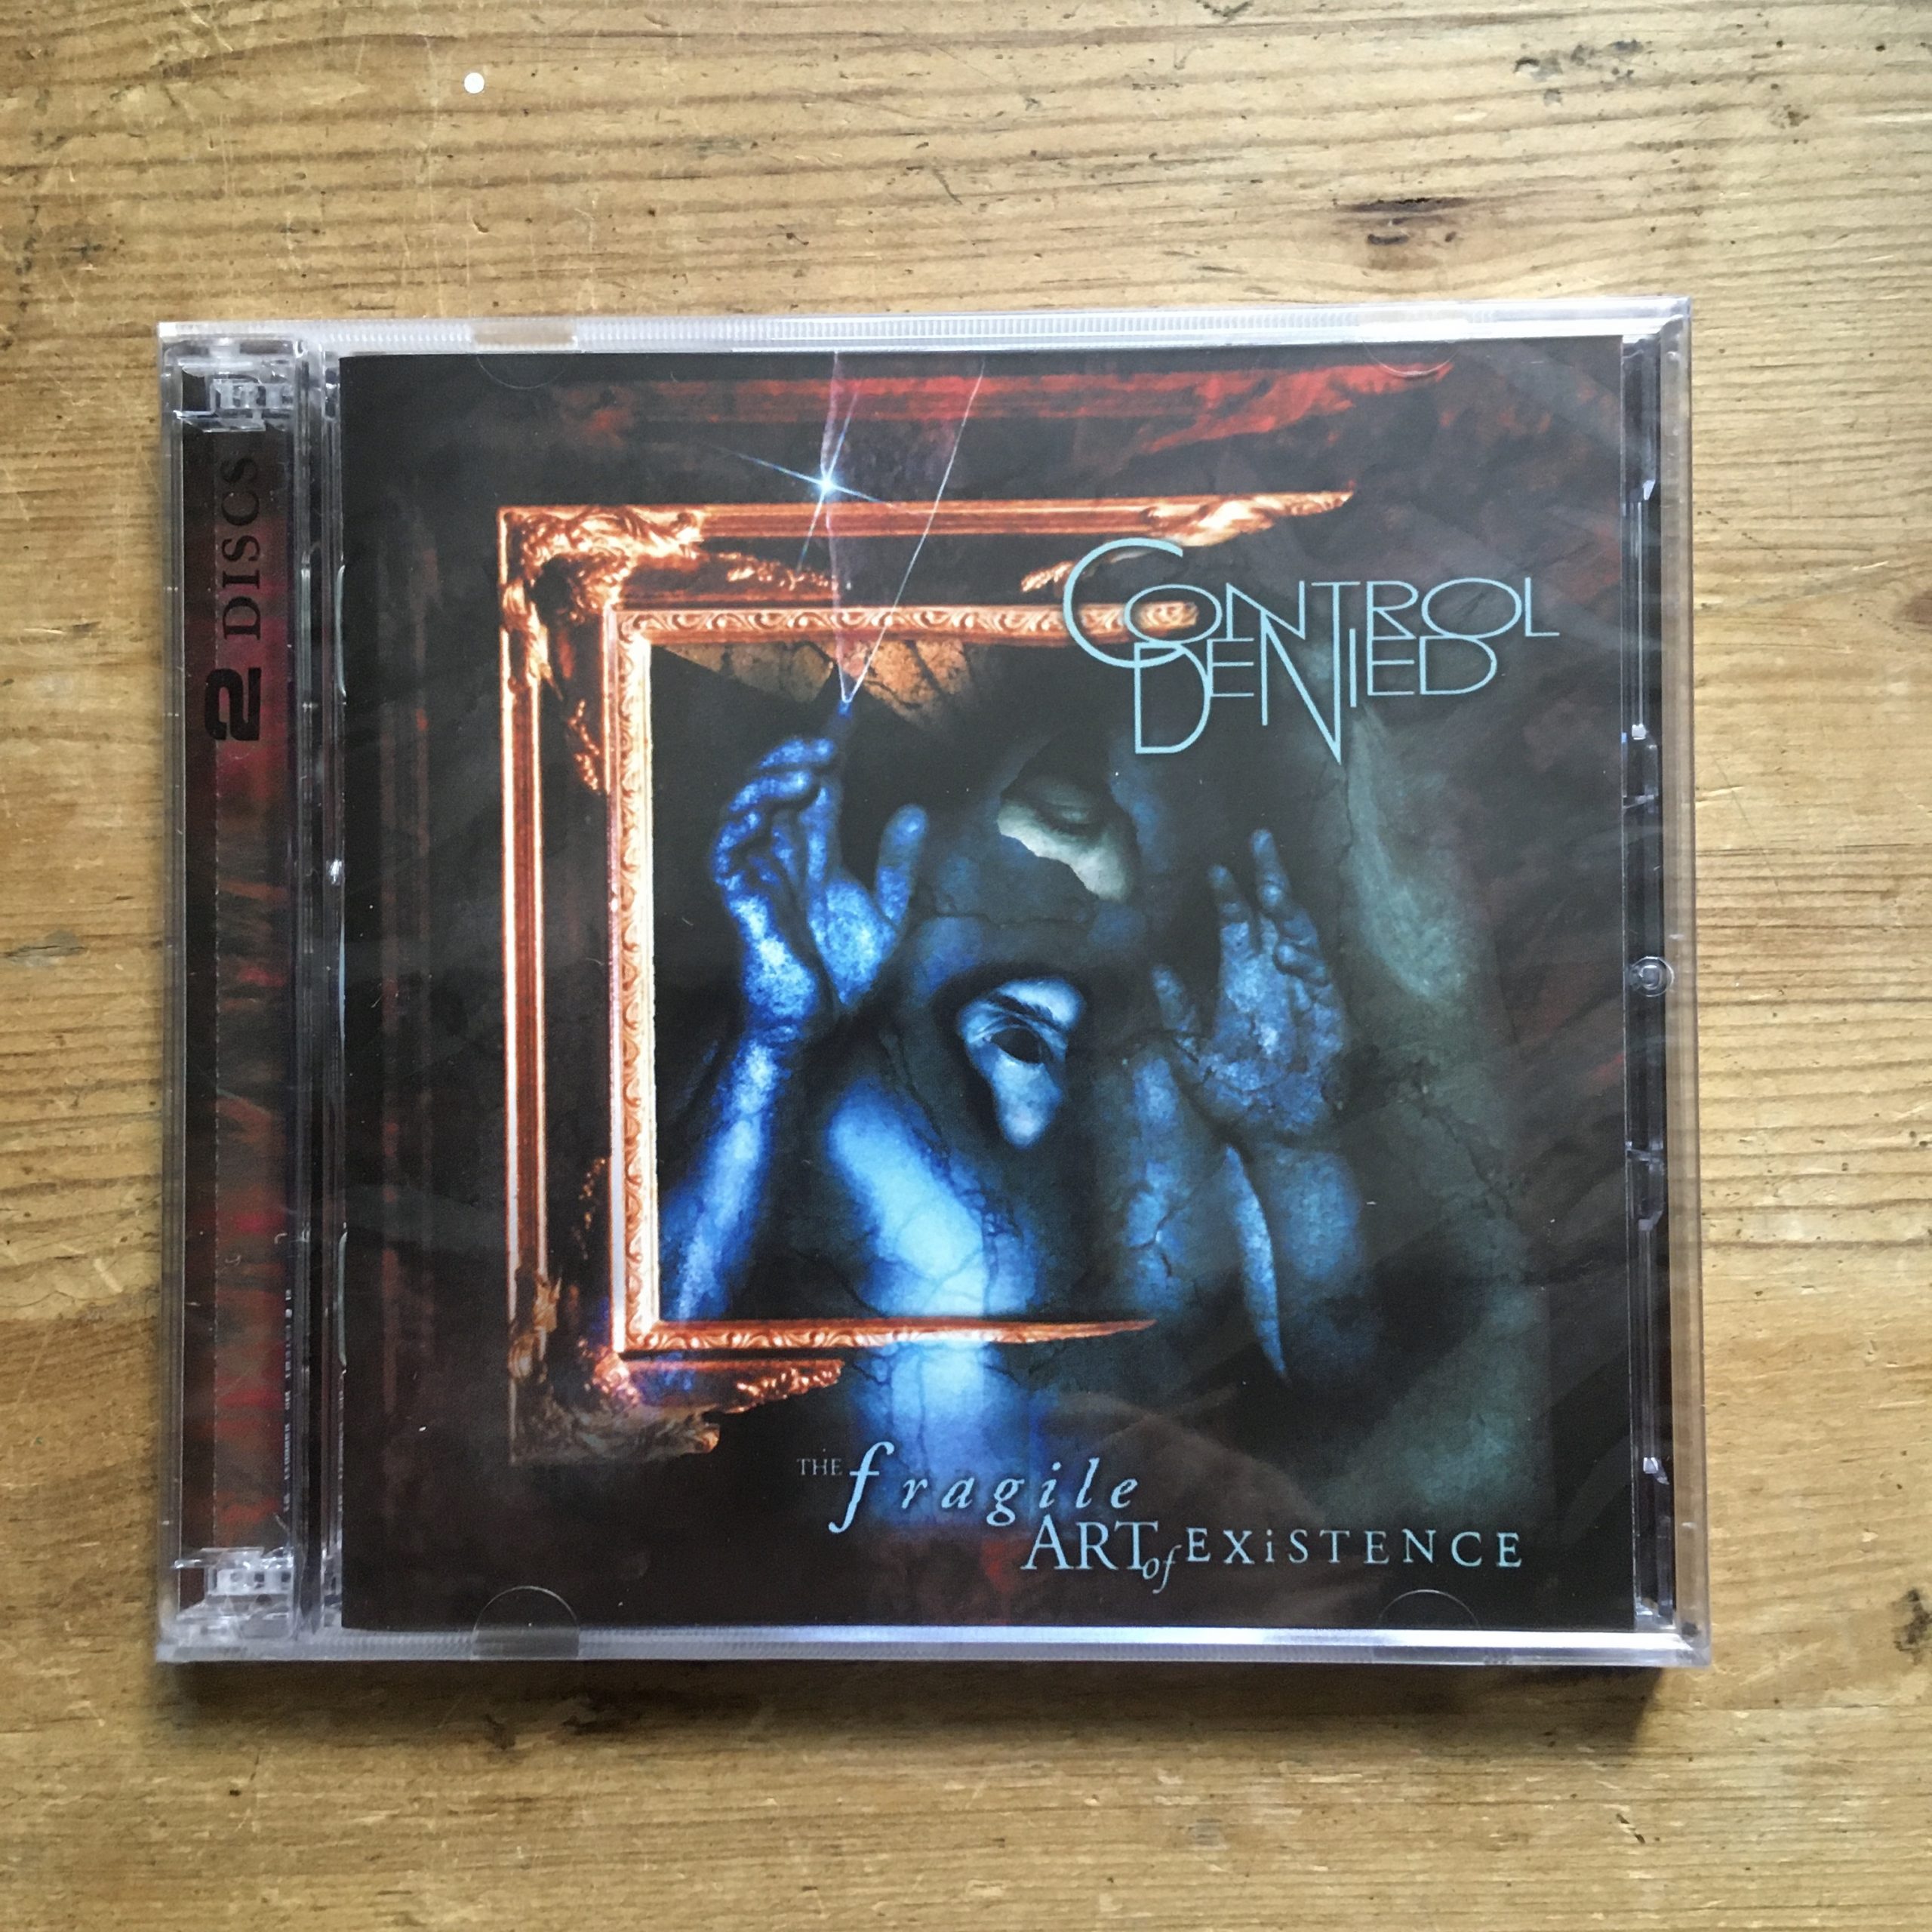 Photo of the Control Denied - "The Fragile Art of Existence" 2CD